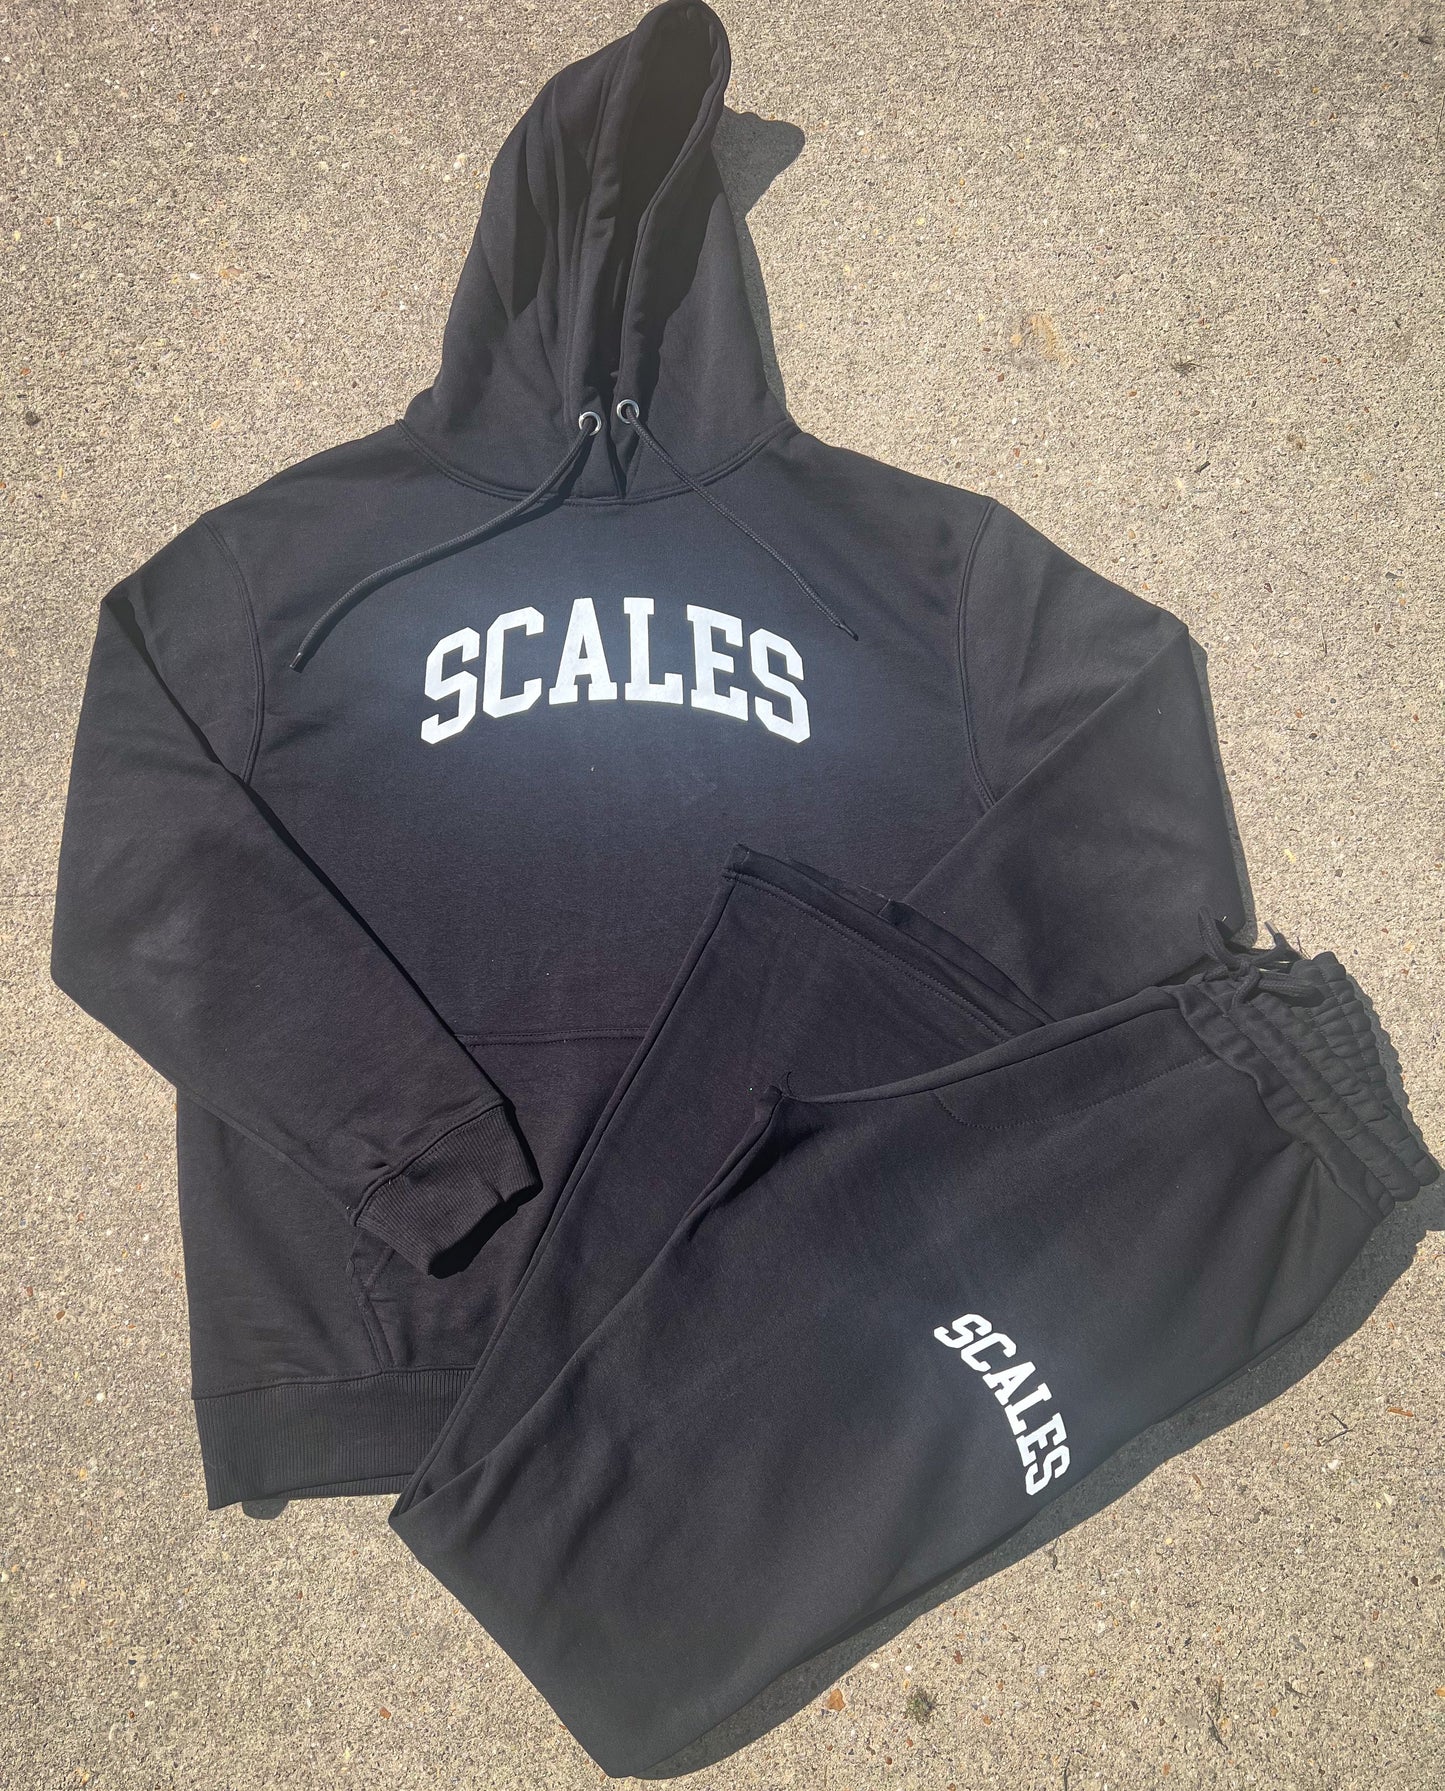 Scales Hooded Stacked Sweatsuit